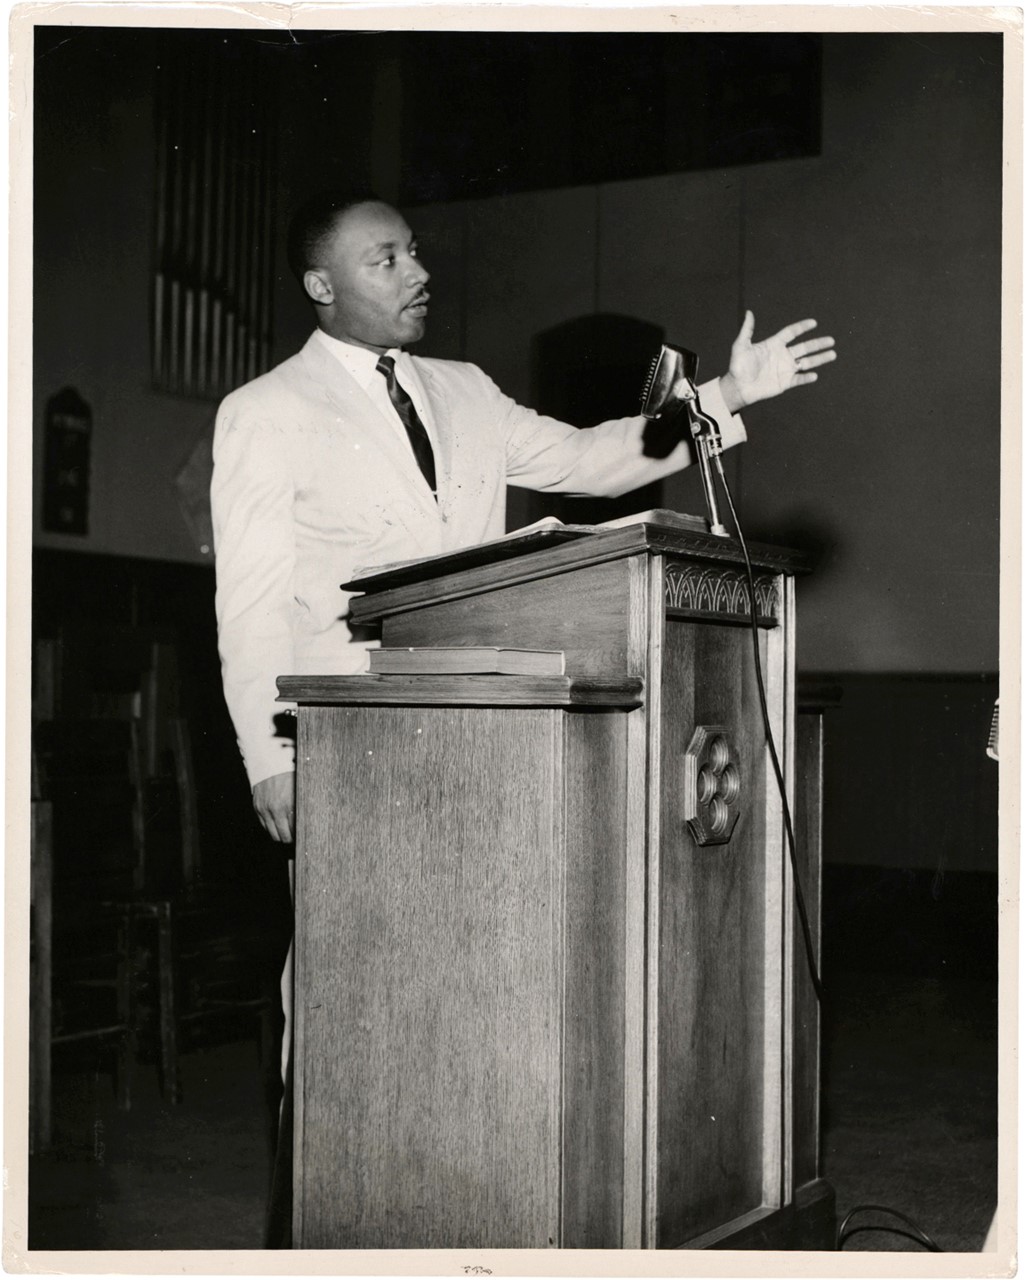 The Brown Brothers Collection - Dr. Martin Luther King at the Pulpit Photograph (PSA Type I)